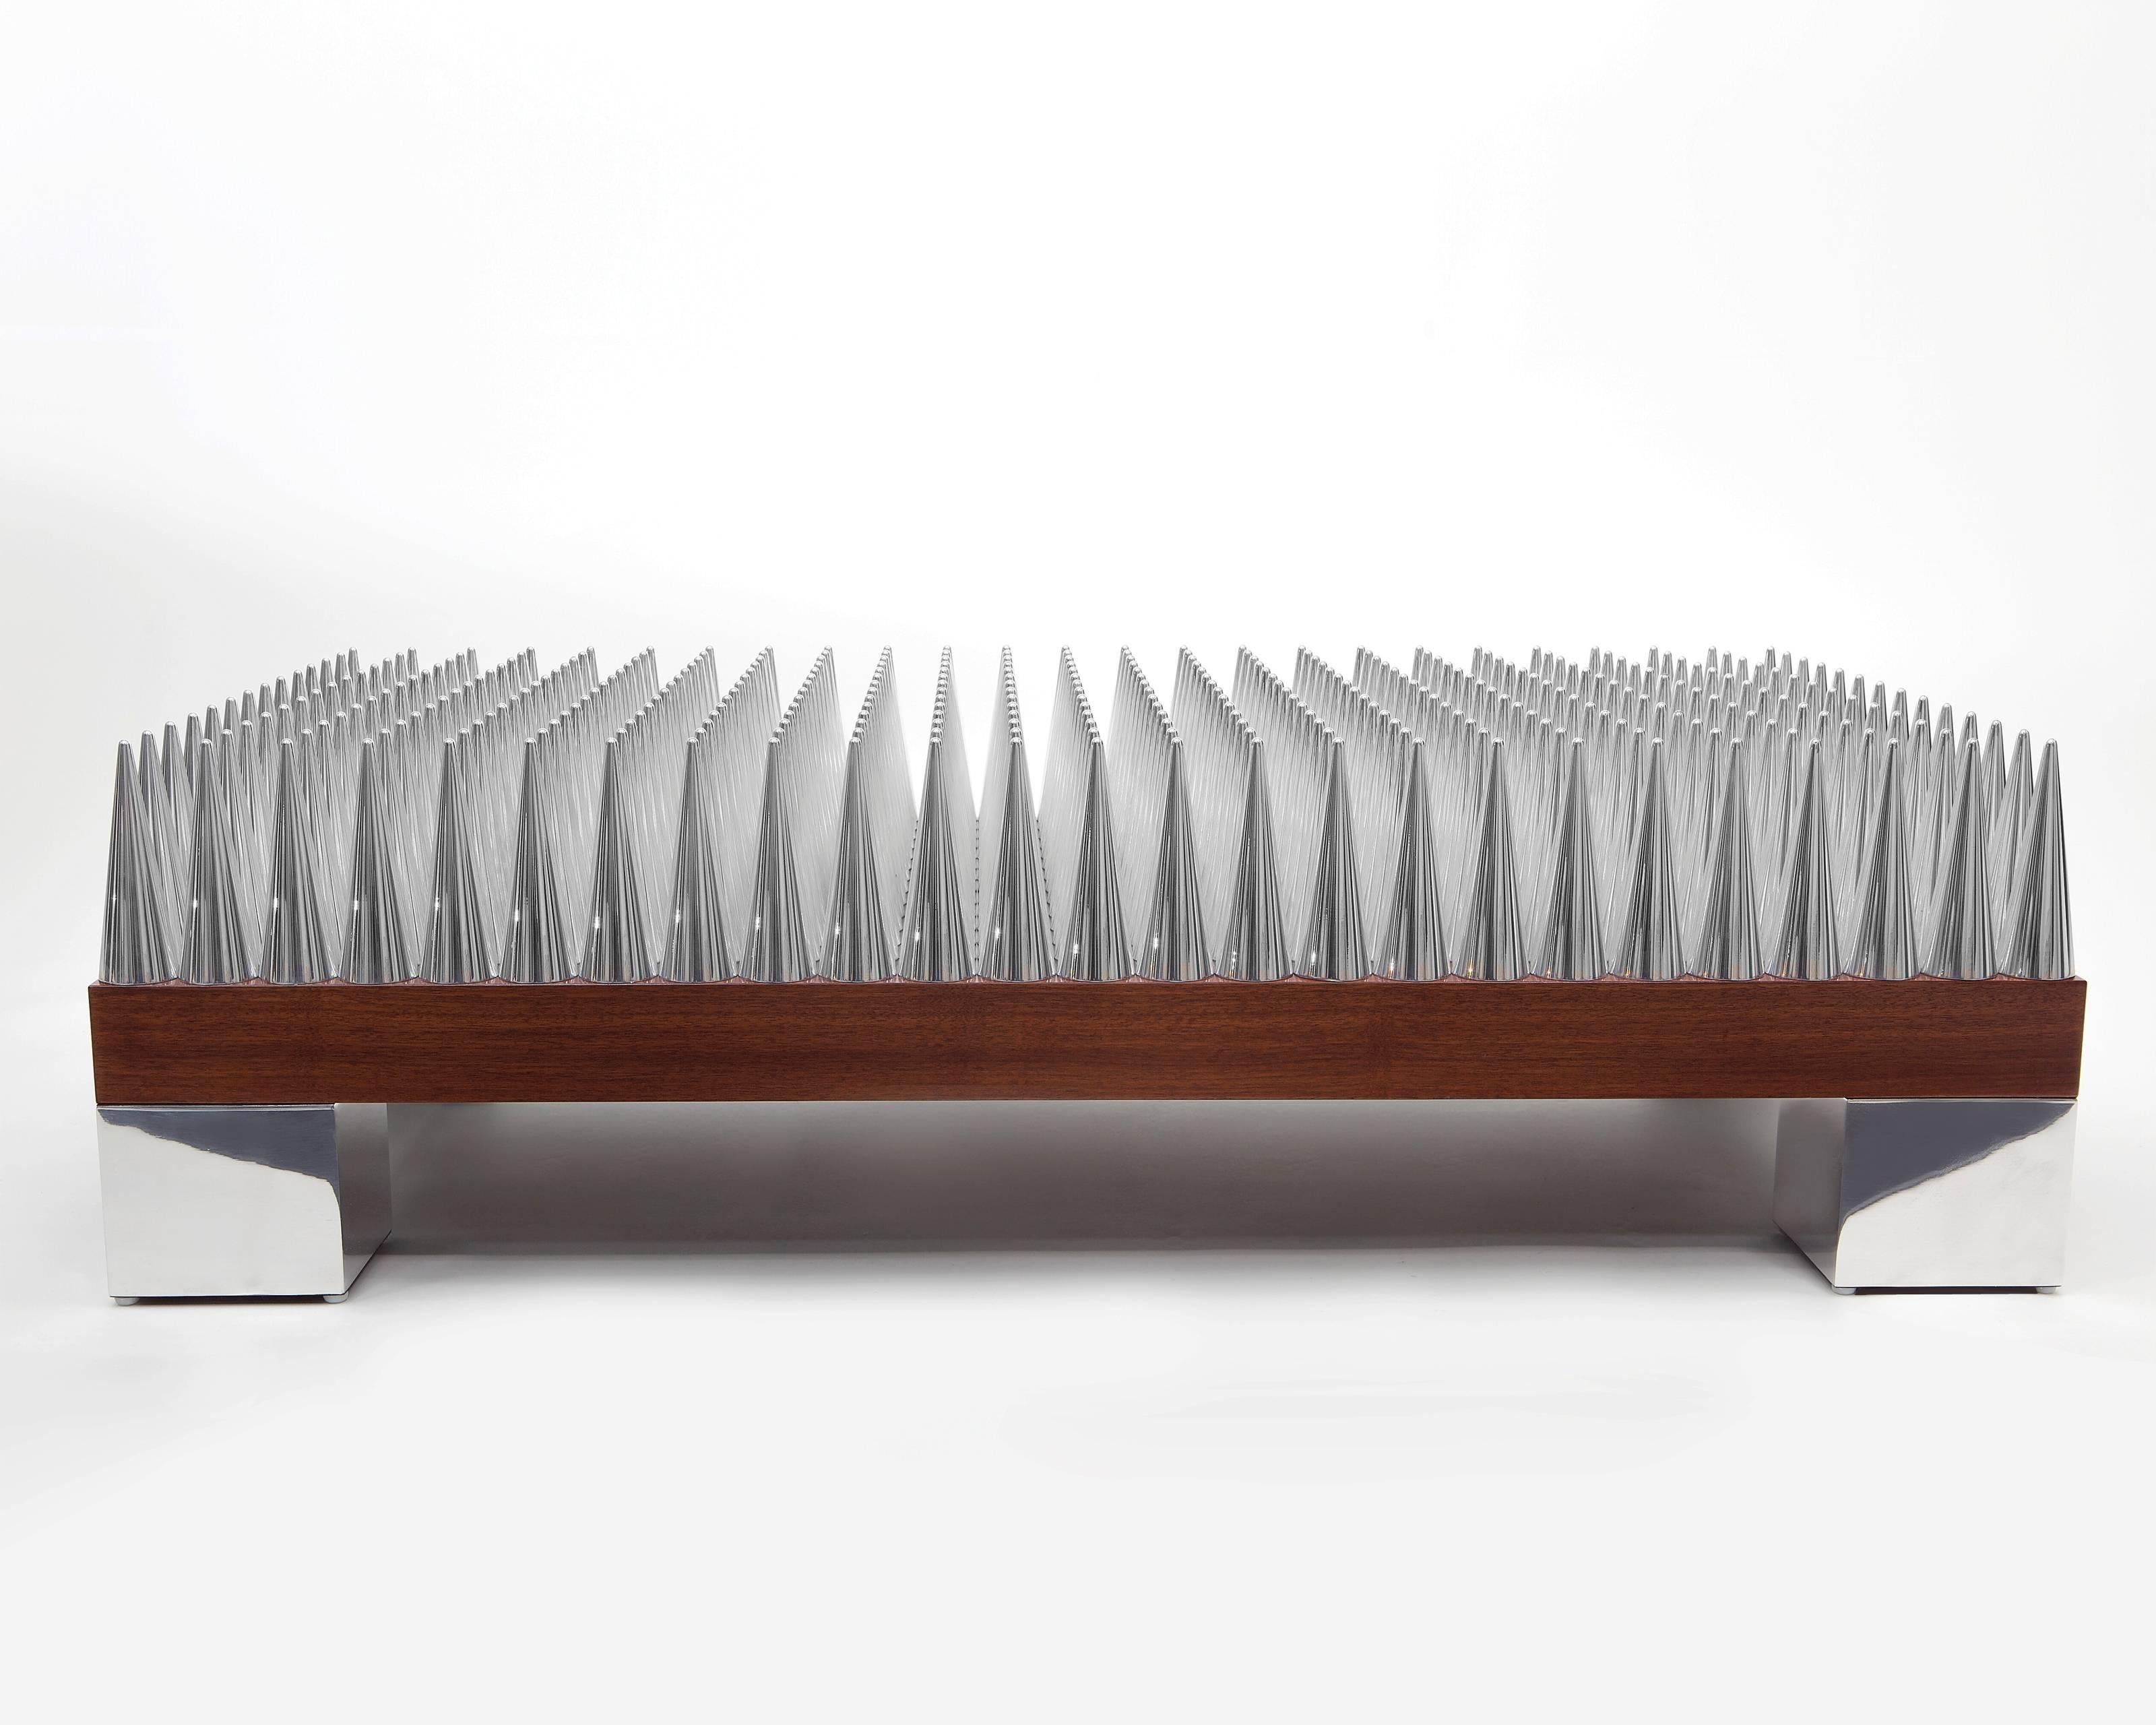 Light, symmetry, and sculpture come together to create the perfect mise en scene for your more daring side. The spike coffee table is the tour du force centerpiece for those who dabble in an unconventional way of life. Solid walnut and billet